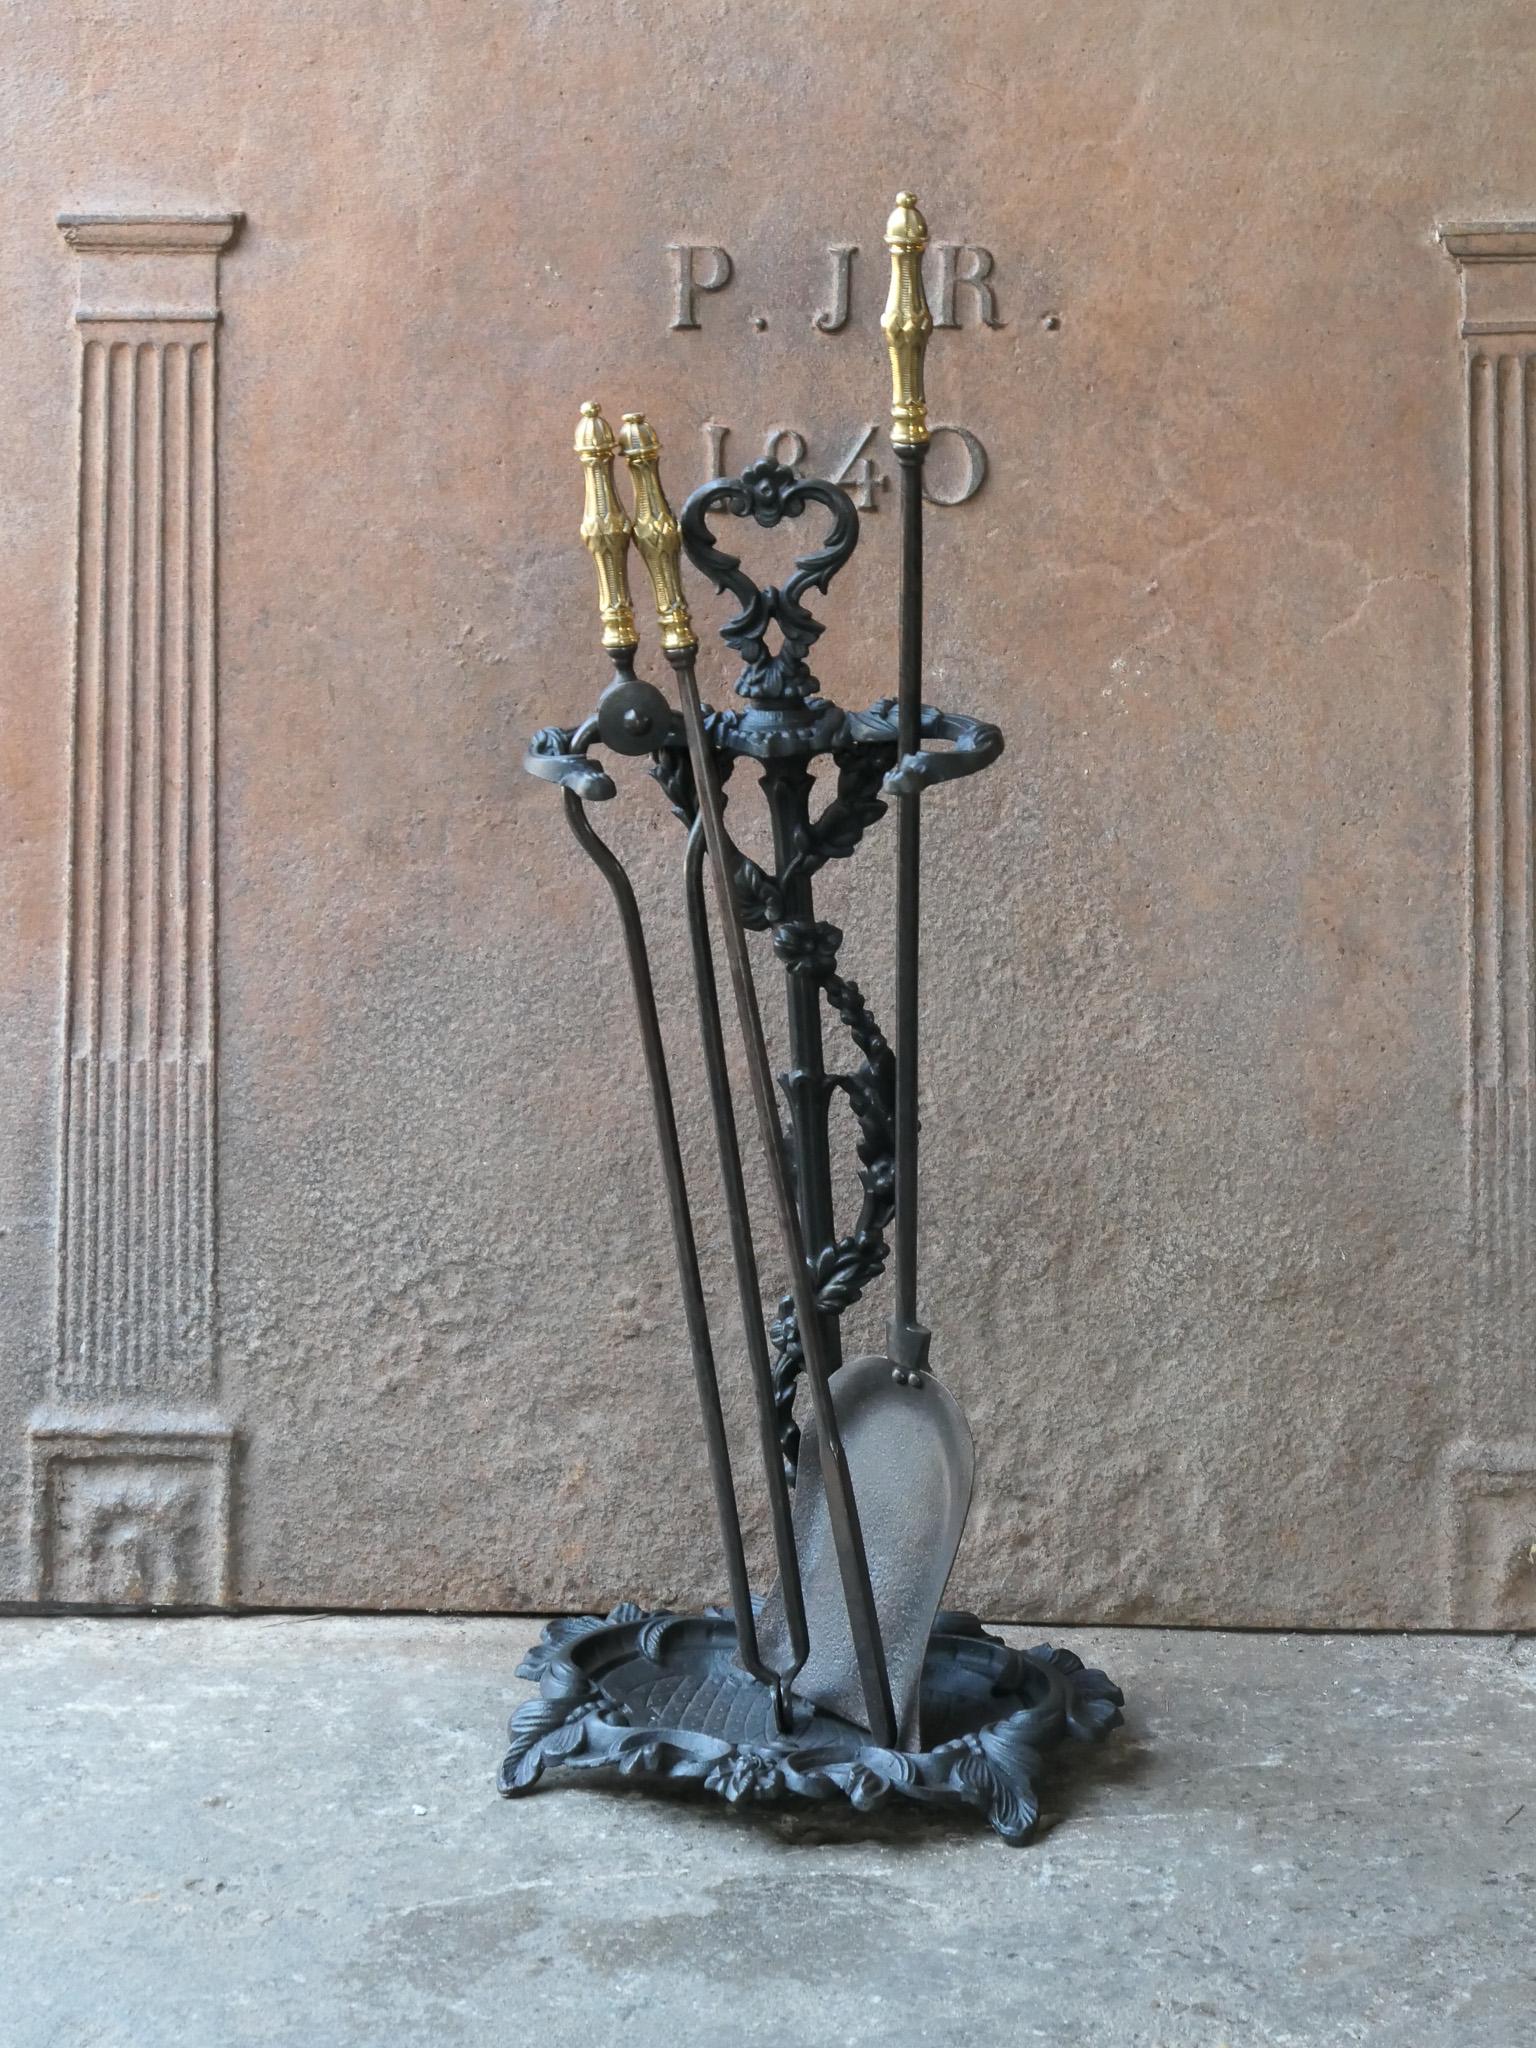 19th century English Victorian period fireplace toolset. The tools are made of wrought iron with bronze handles, while the stand is made of cast iron. The toolset consists of tongs, shovel and stand. The condition is good.








.